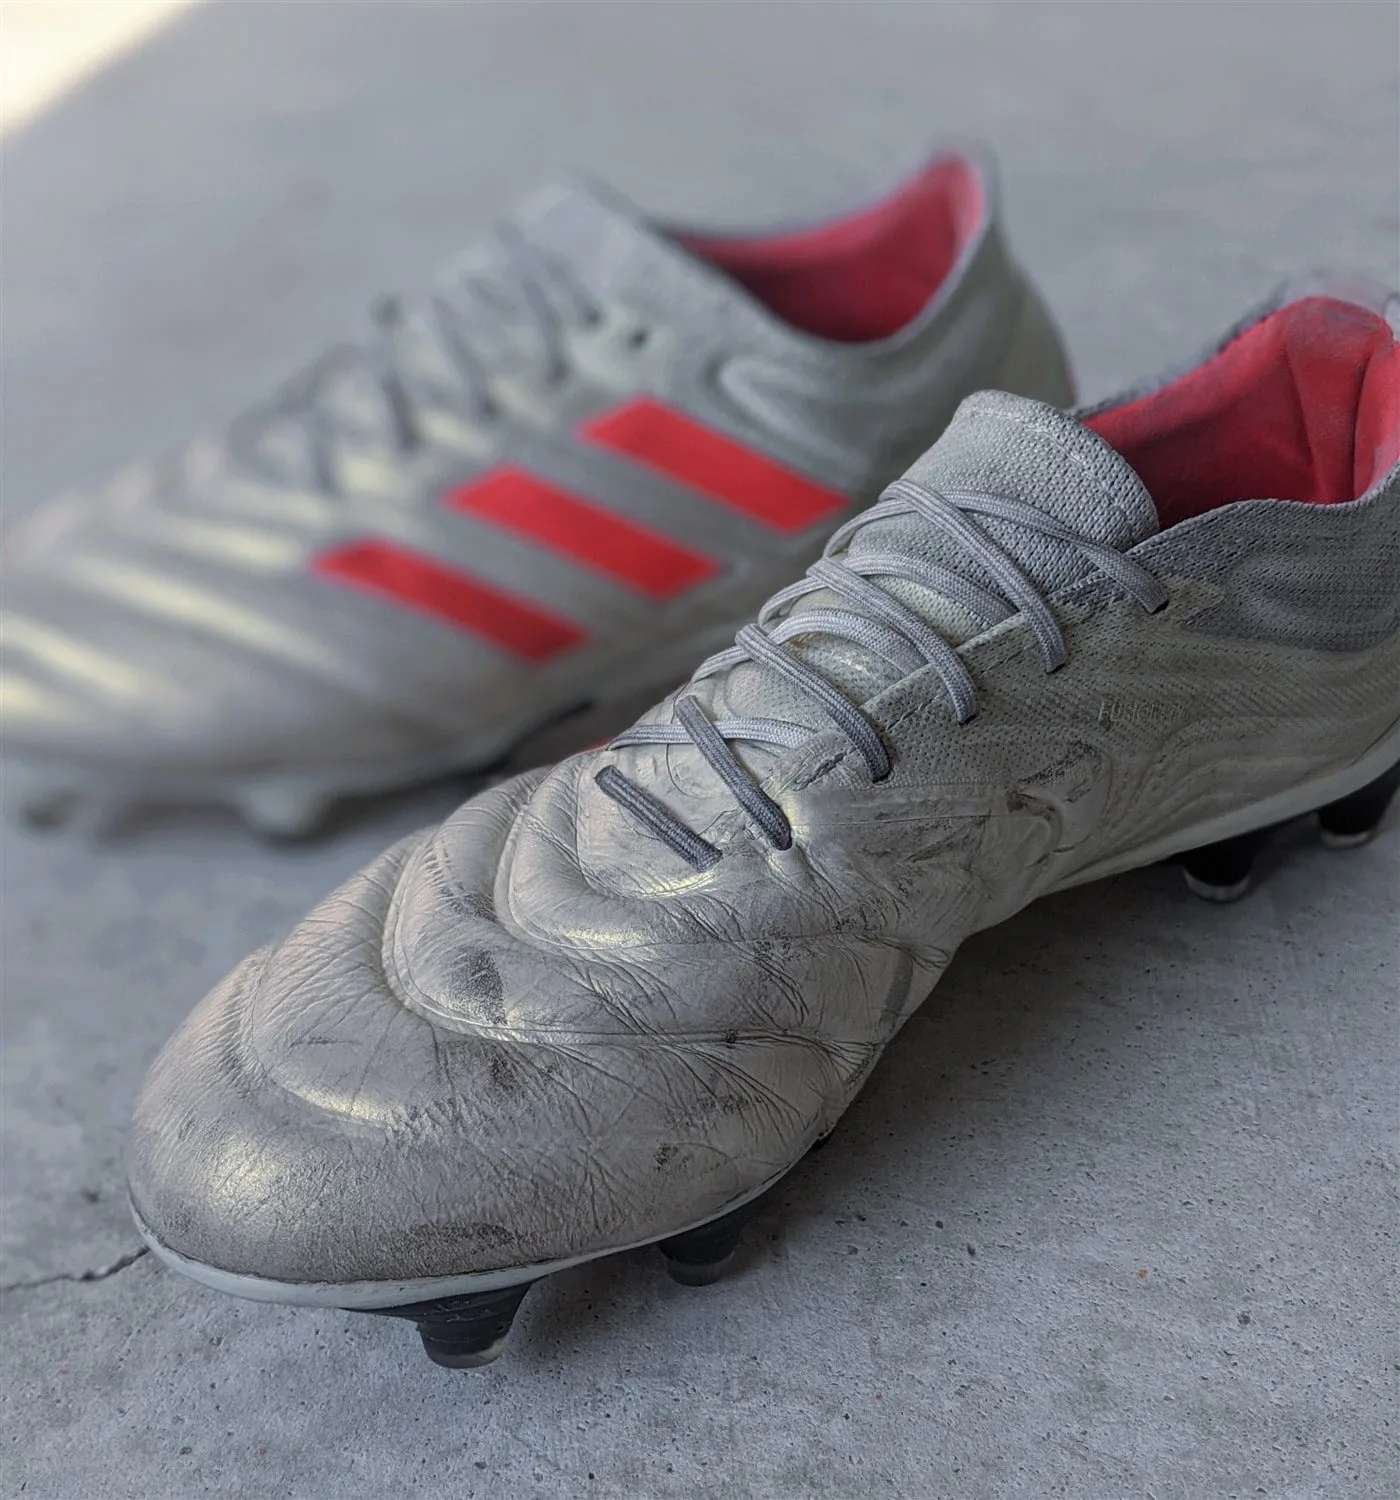 adidas copa 19.1 post hype review football boot soccer cleats (3)